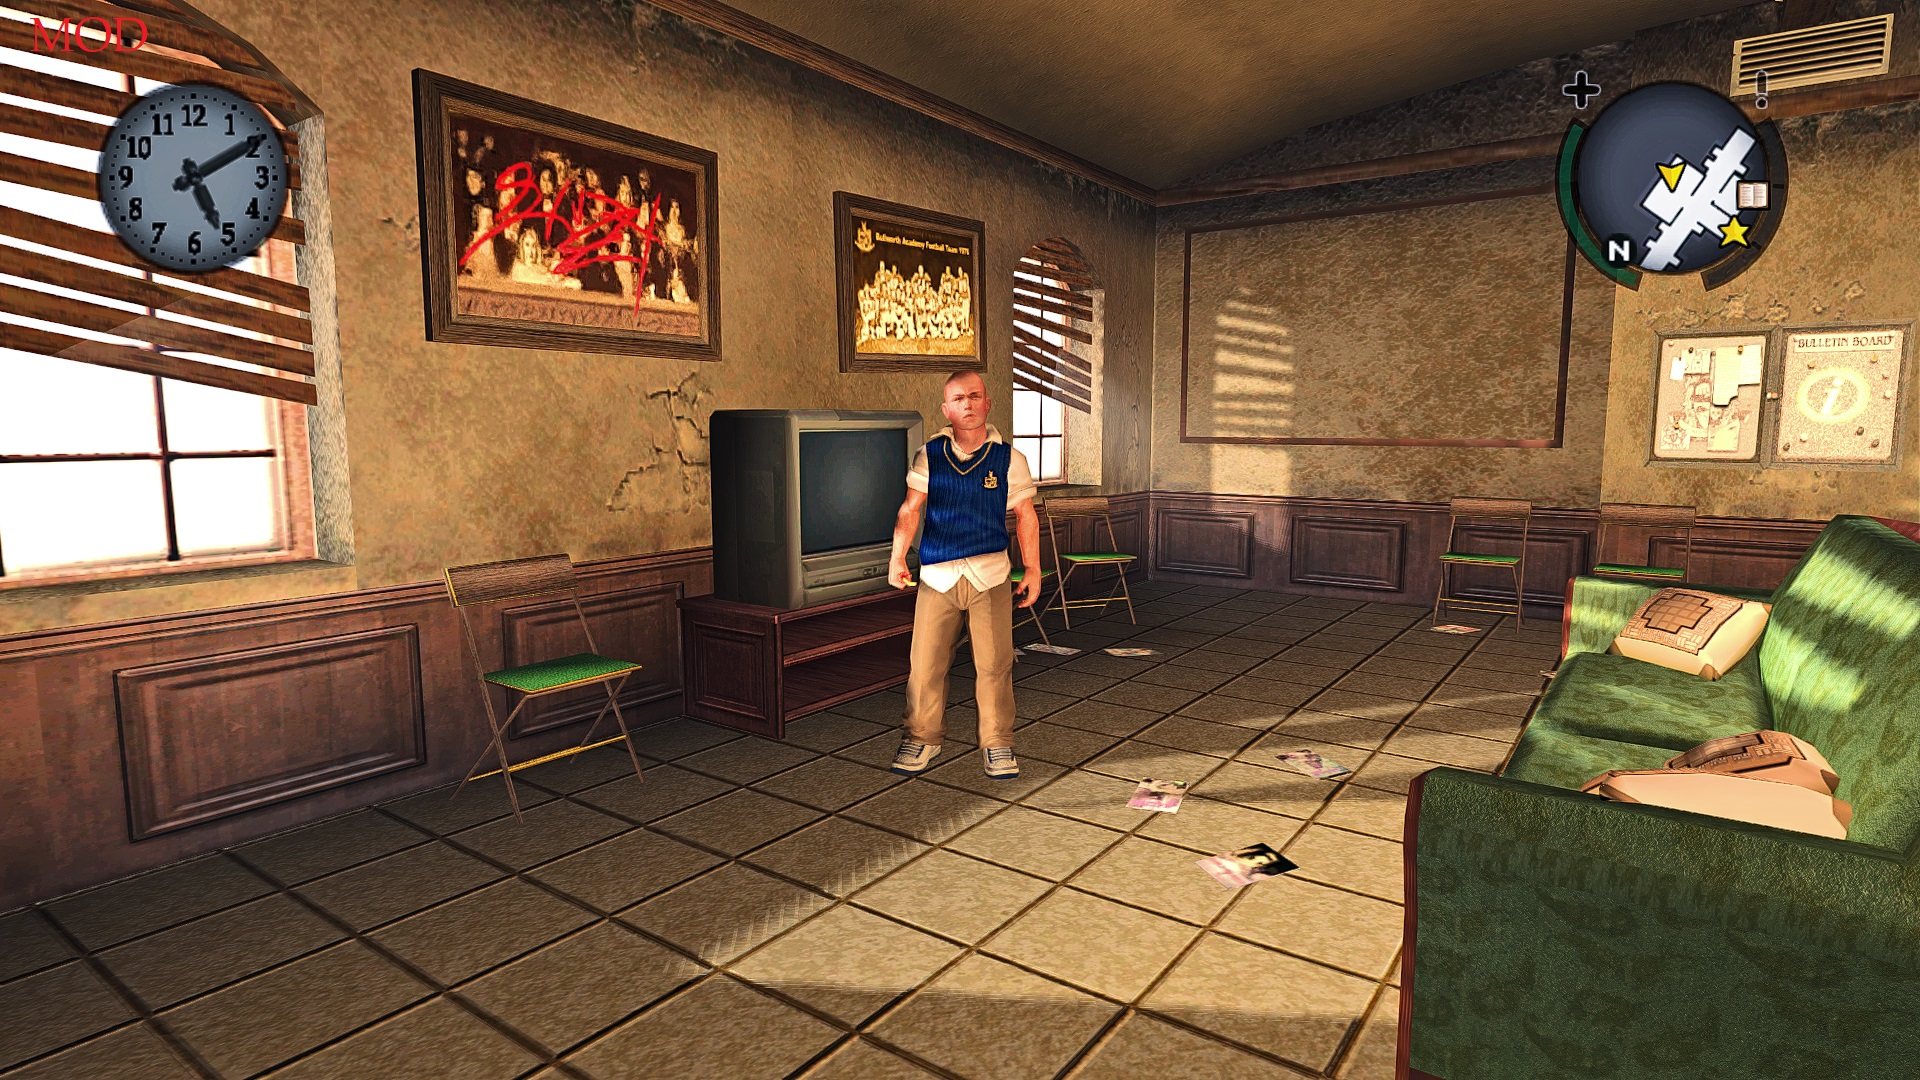 Bully: Scholarship Edition - Unofficial Enhancements file - ModDB